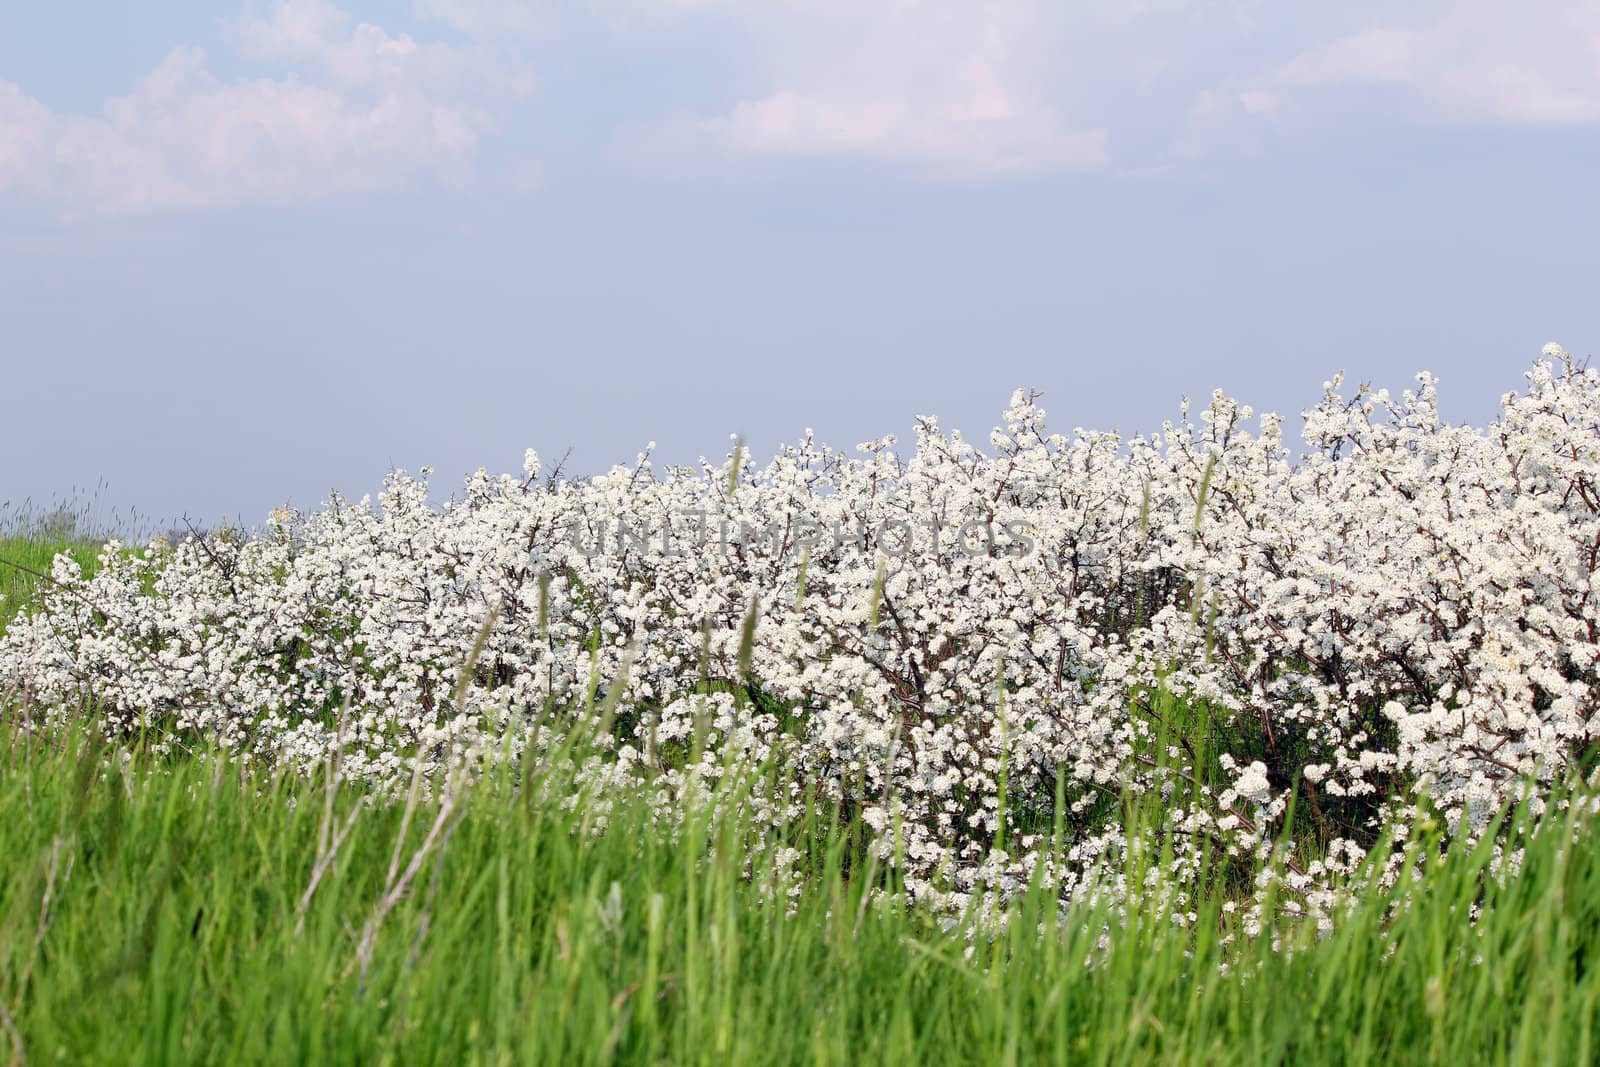 meadow with green grass and white flower